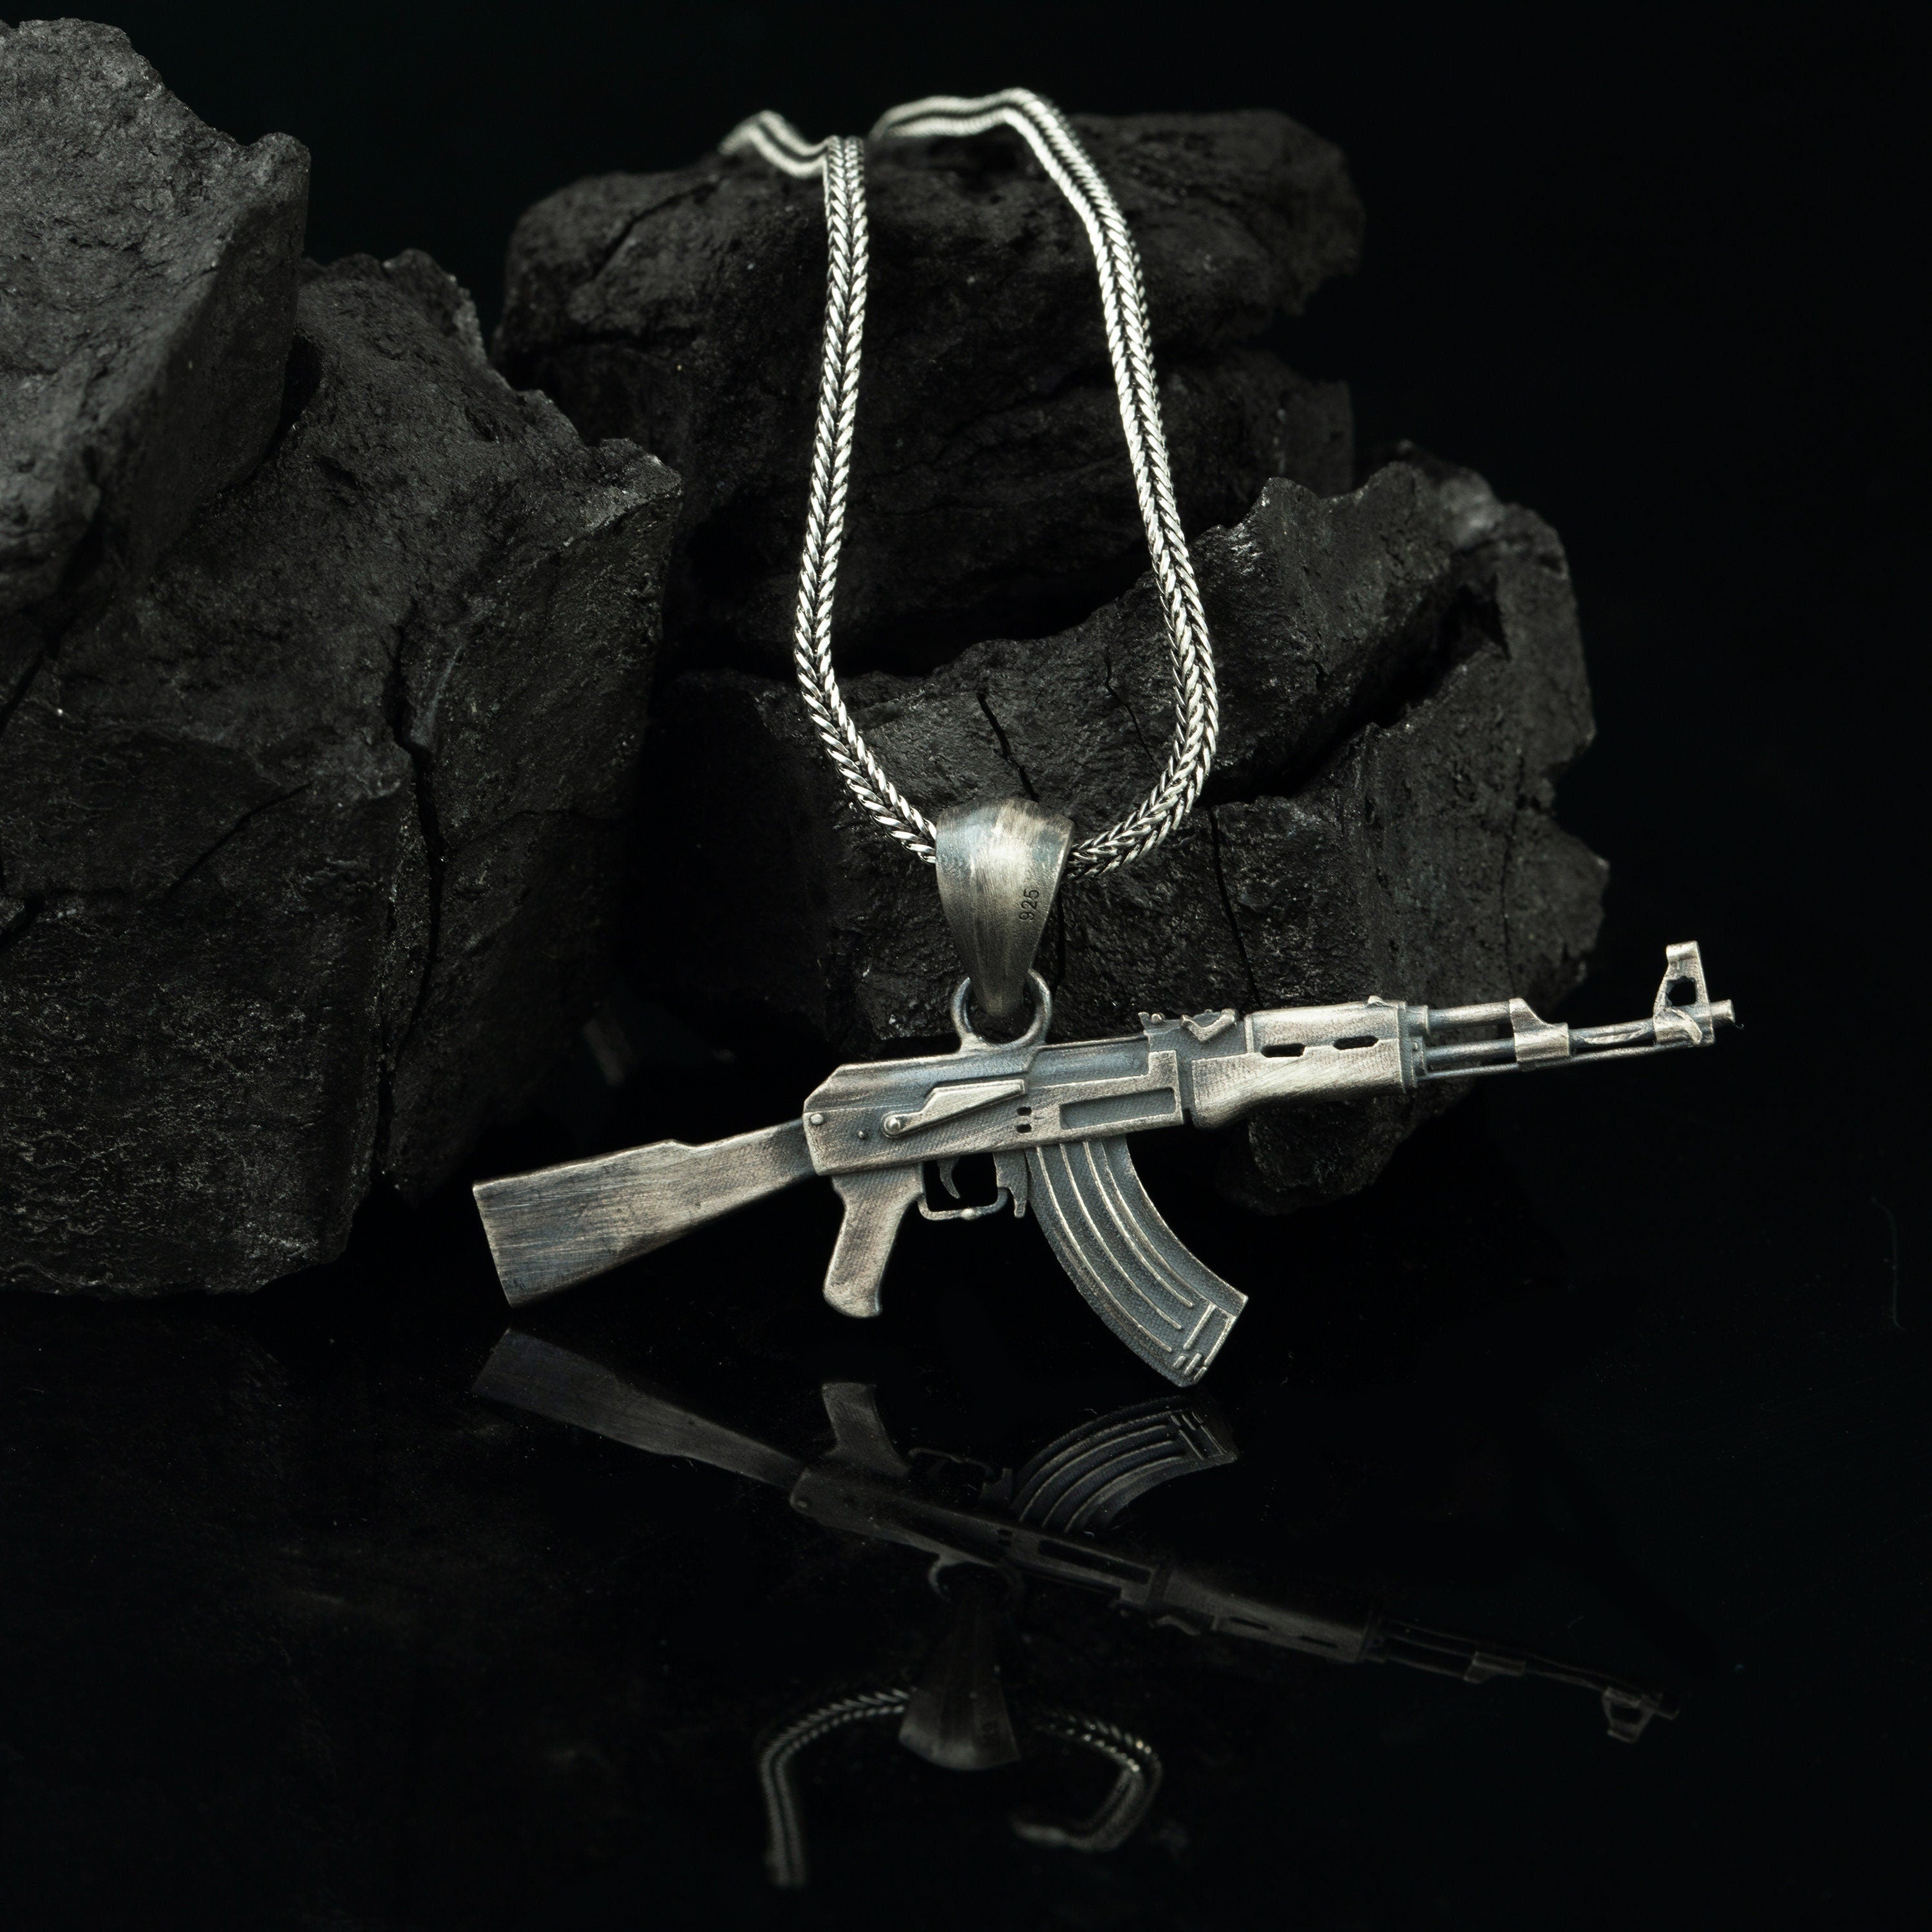 Mens 925 Sterling Silve Ak47 Army Rifle Pendant Necklace - 22 Inch | Fruugo  KR